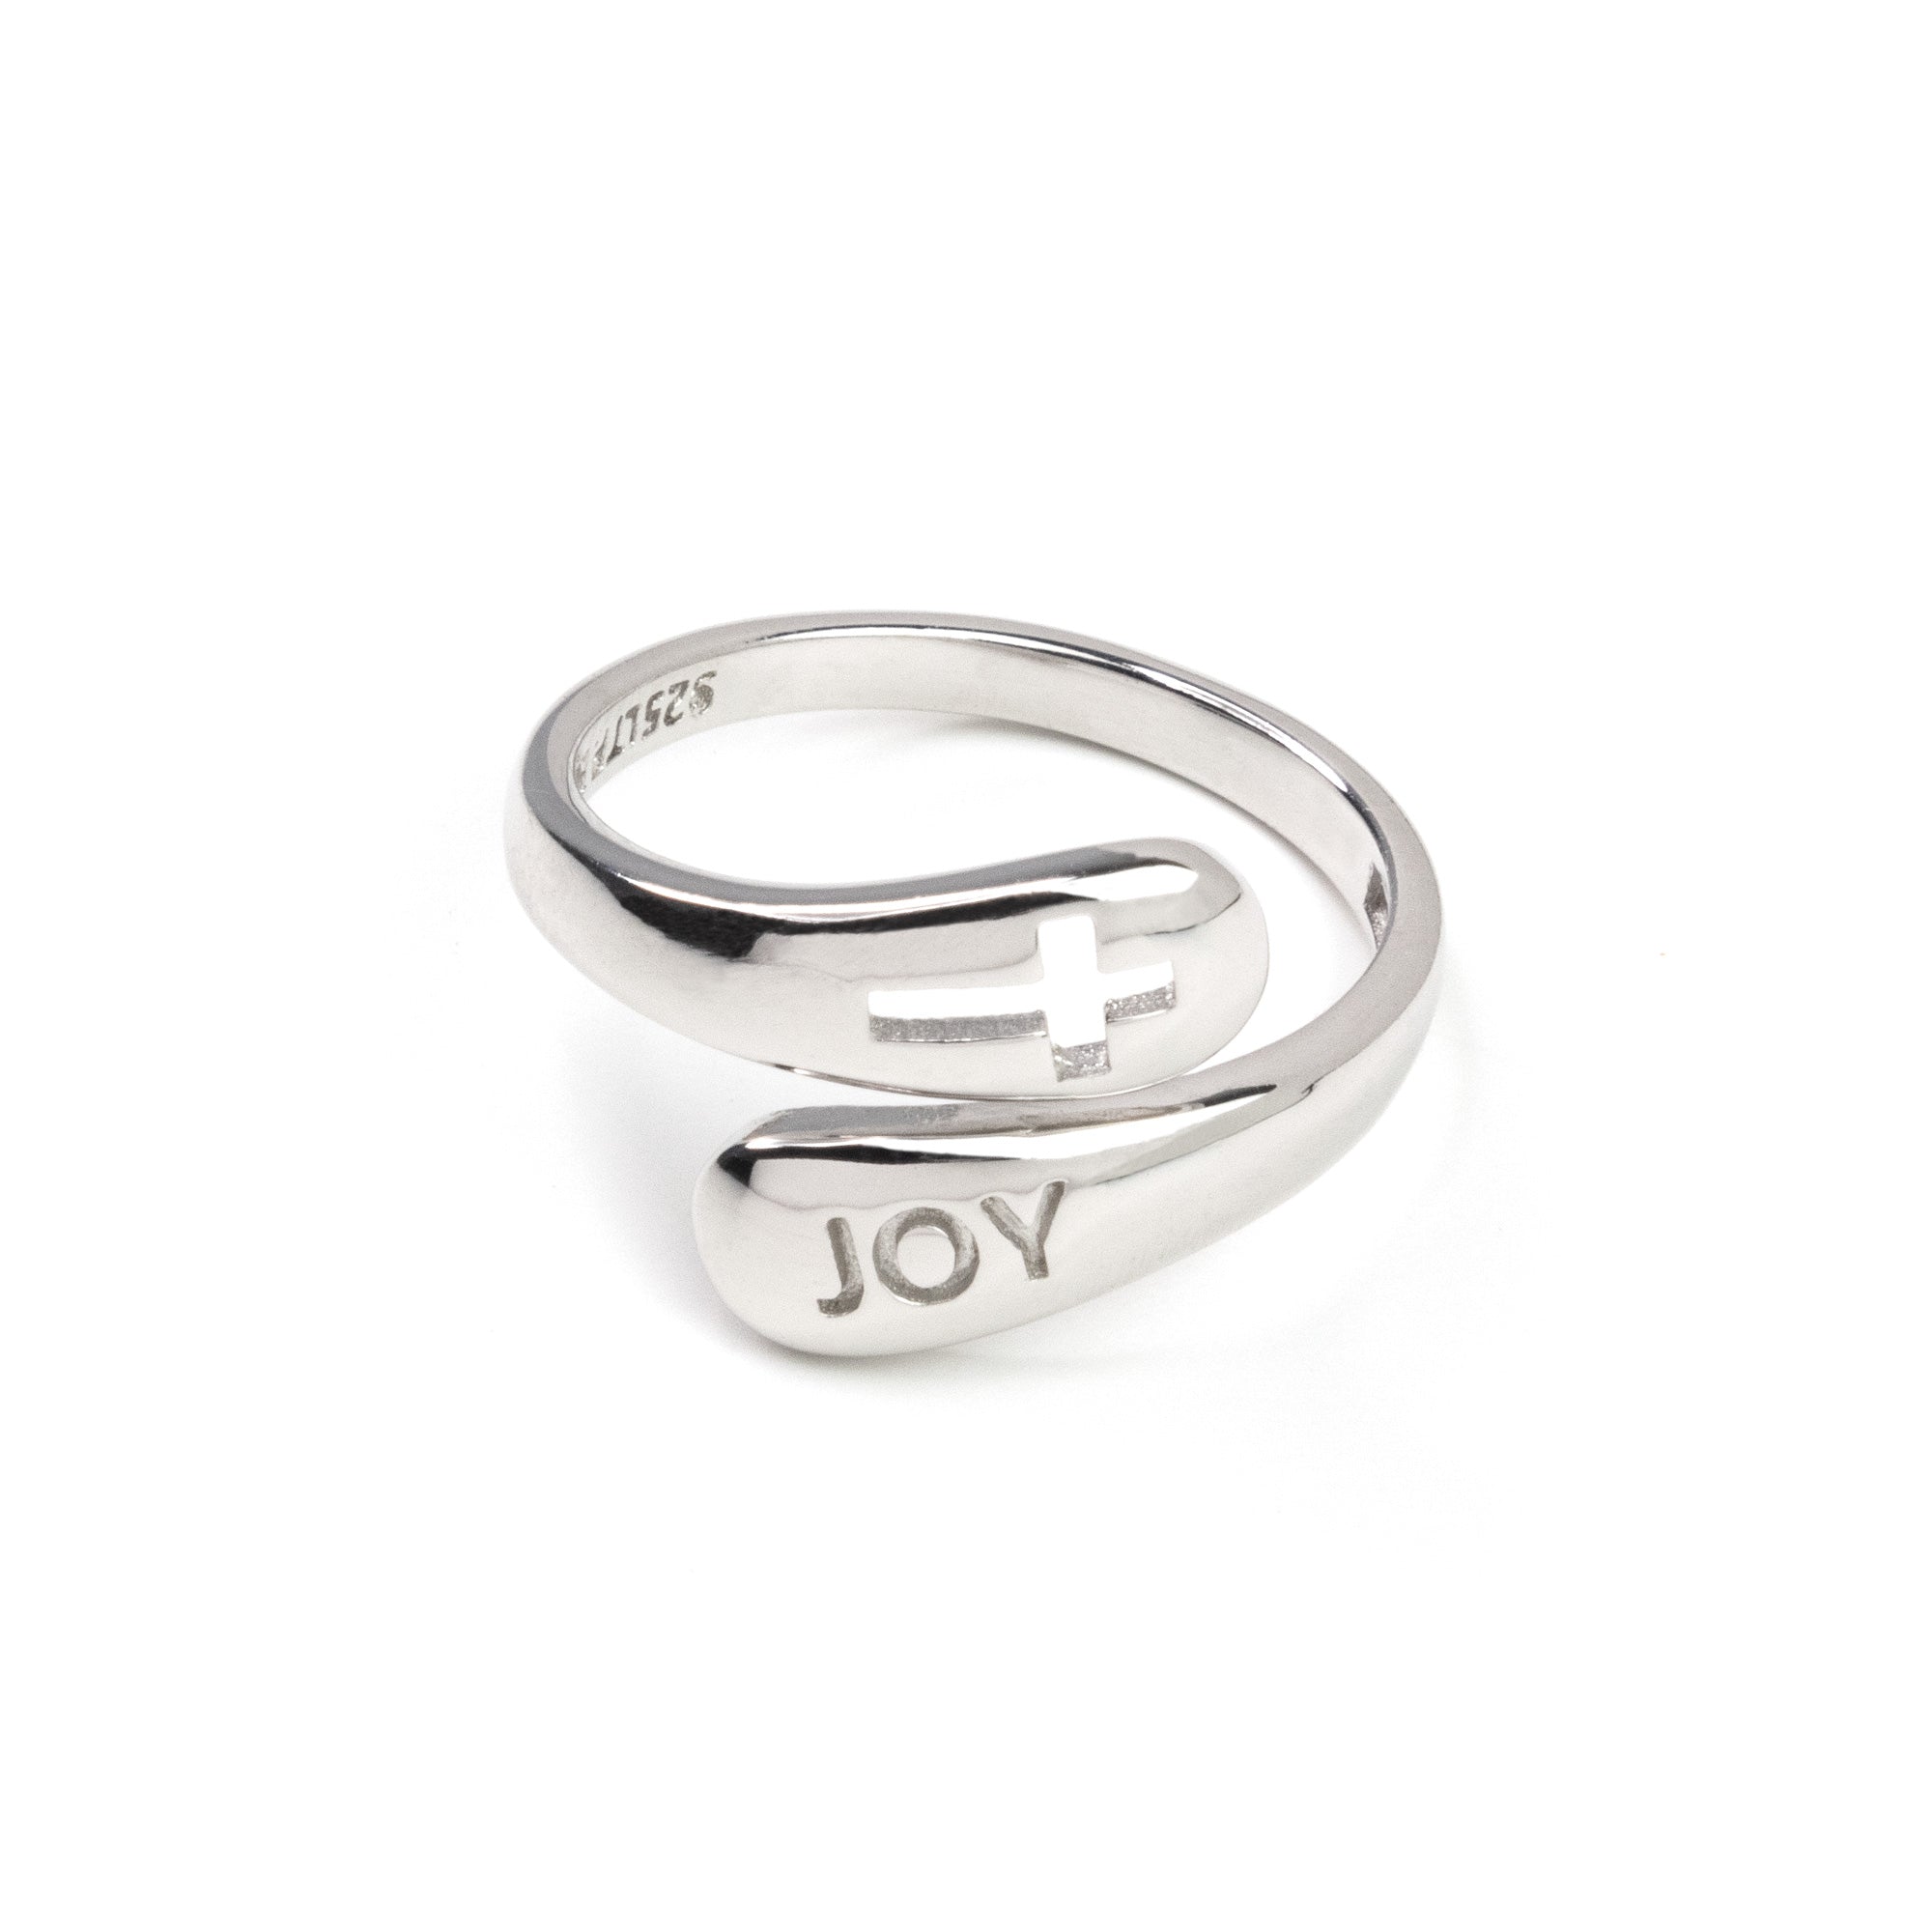 Sterling Silver Wrap Ring - Joy and Cut Out Cross, One Size Fits Most